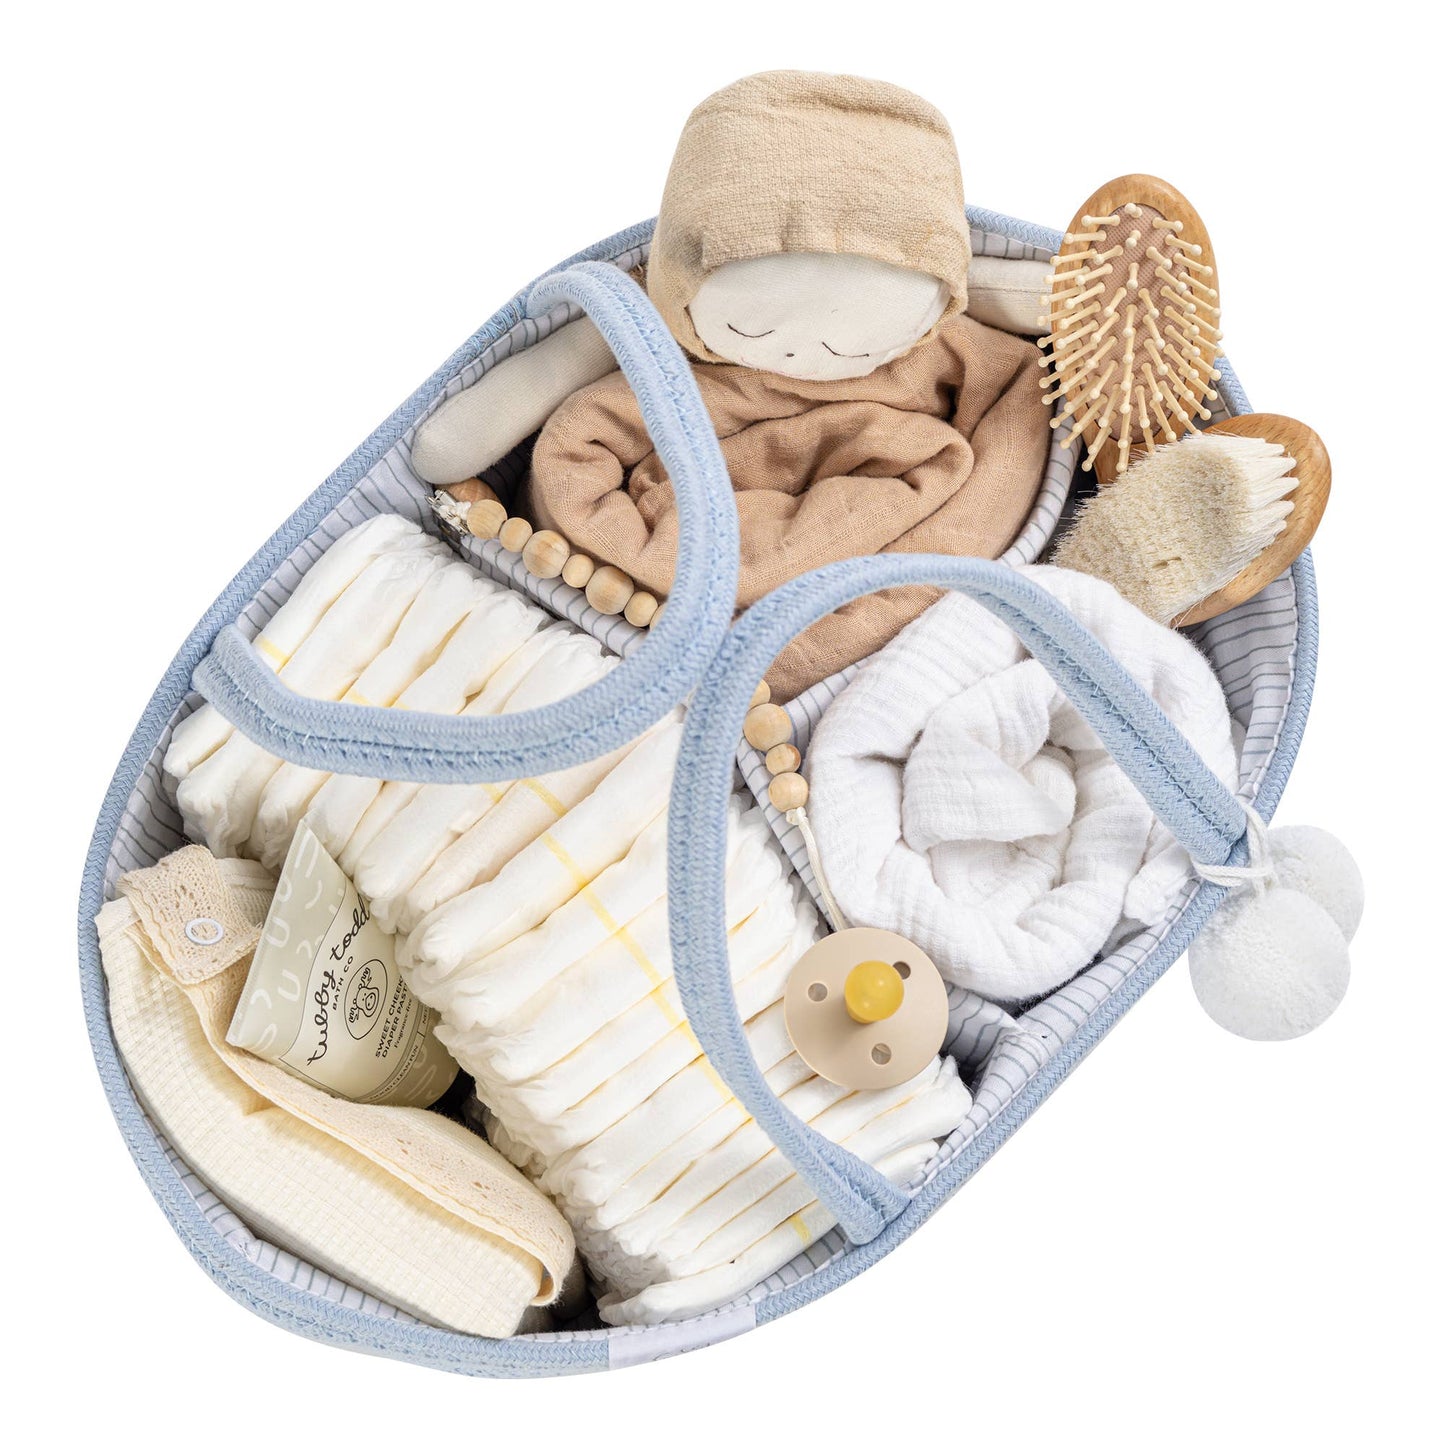 Rope Diaper Caddy | Misty Blue